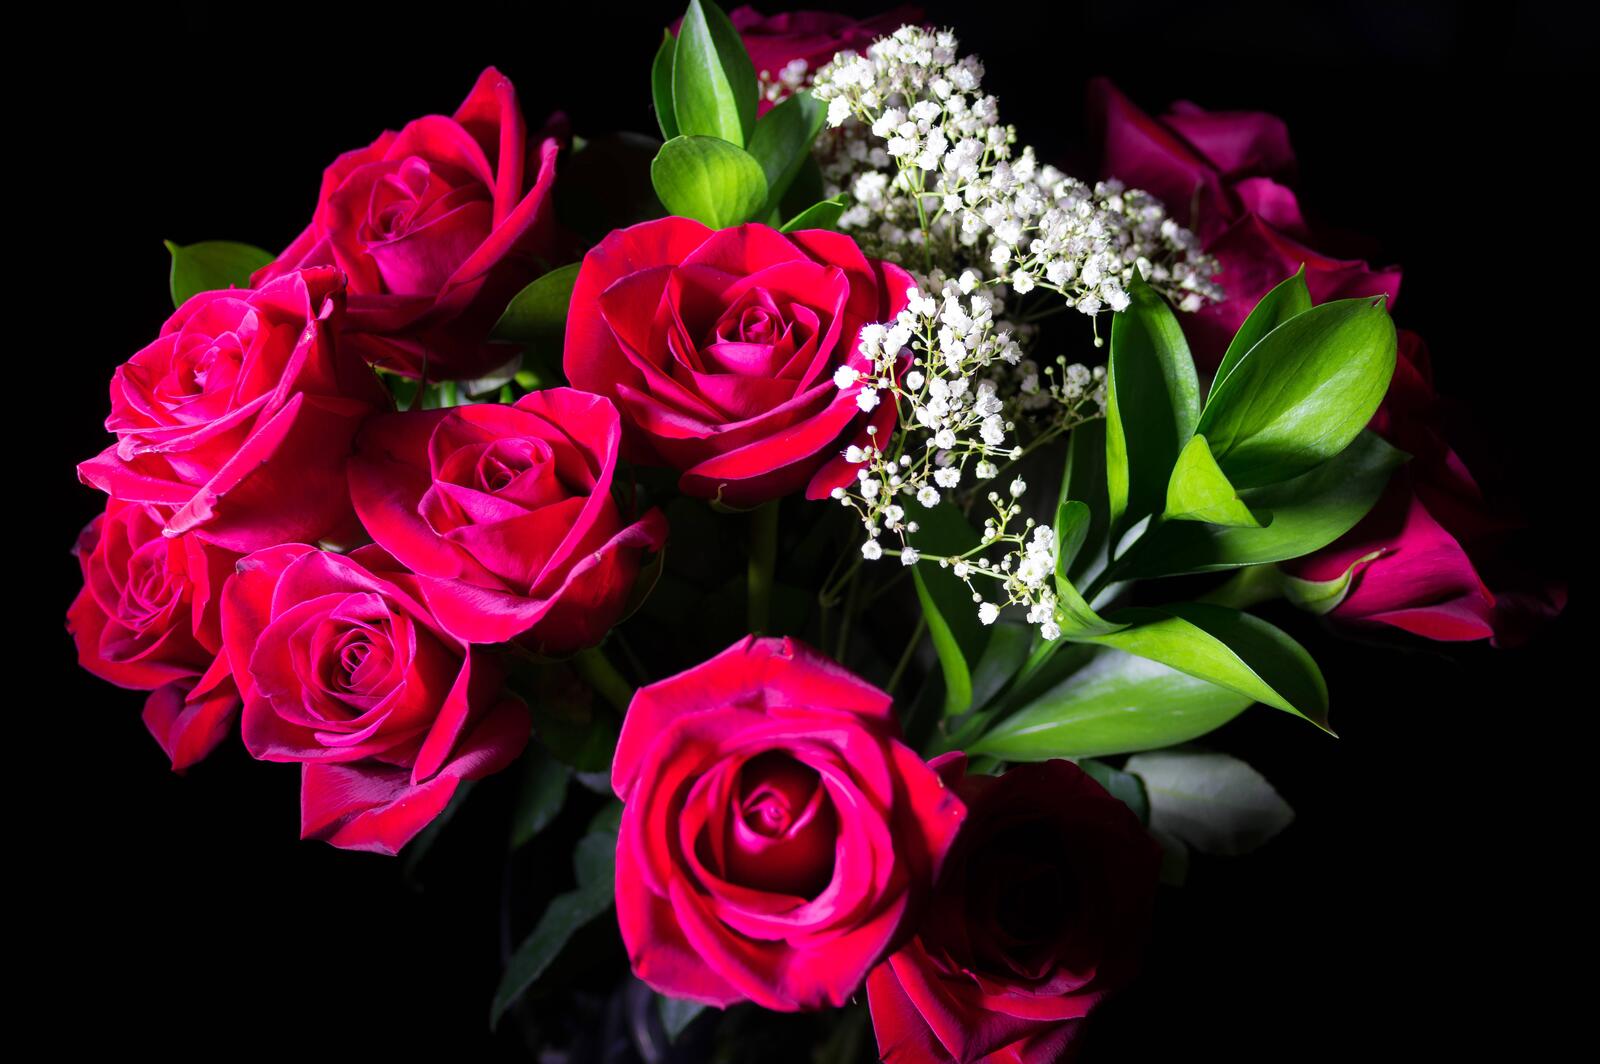 Wallpapers roses bouquet of roses black background on the desktop